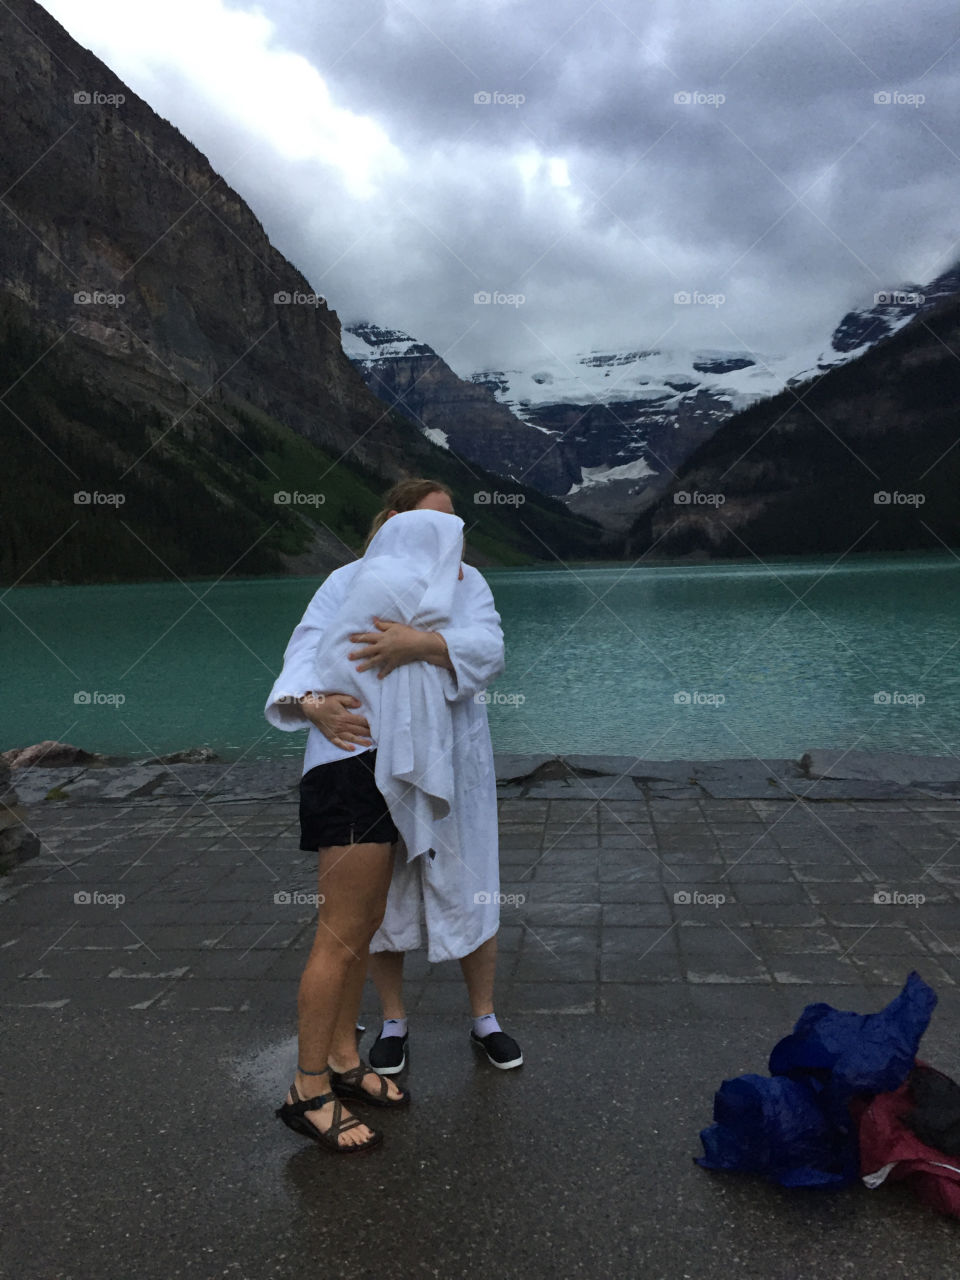 After the plunge: below freezing temperatures of the glacier-fed lake. 